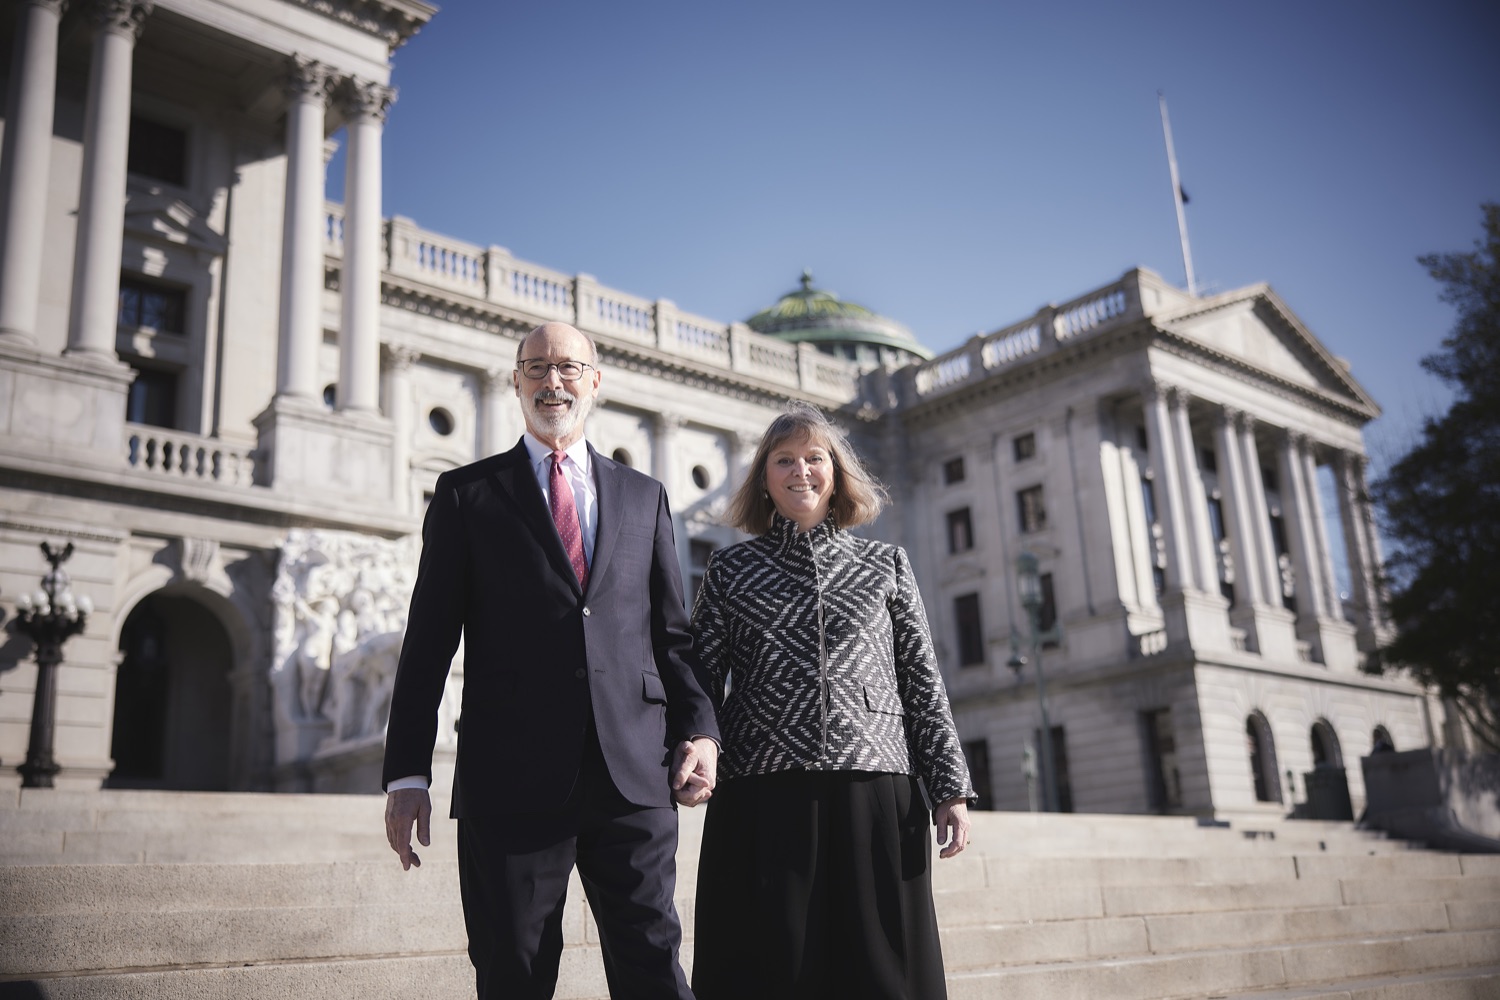 Governor Tom Wolf and First Lady Frances Wolf leave the Capitol together in their final days in office.   Harrisburg PA<br><a href="https://filesource.amperwave.net/commonwealthofpa/photo/22524_gov_legacy_dz_003.JPG" target="_blank">⇣ Download Photo</a>